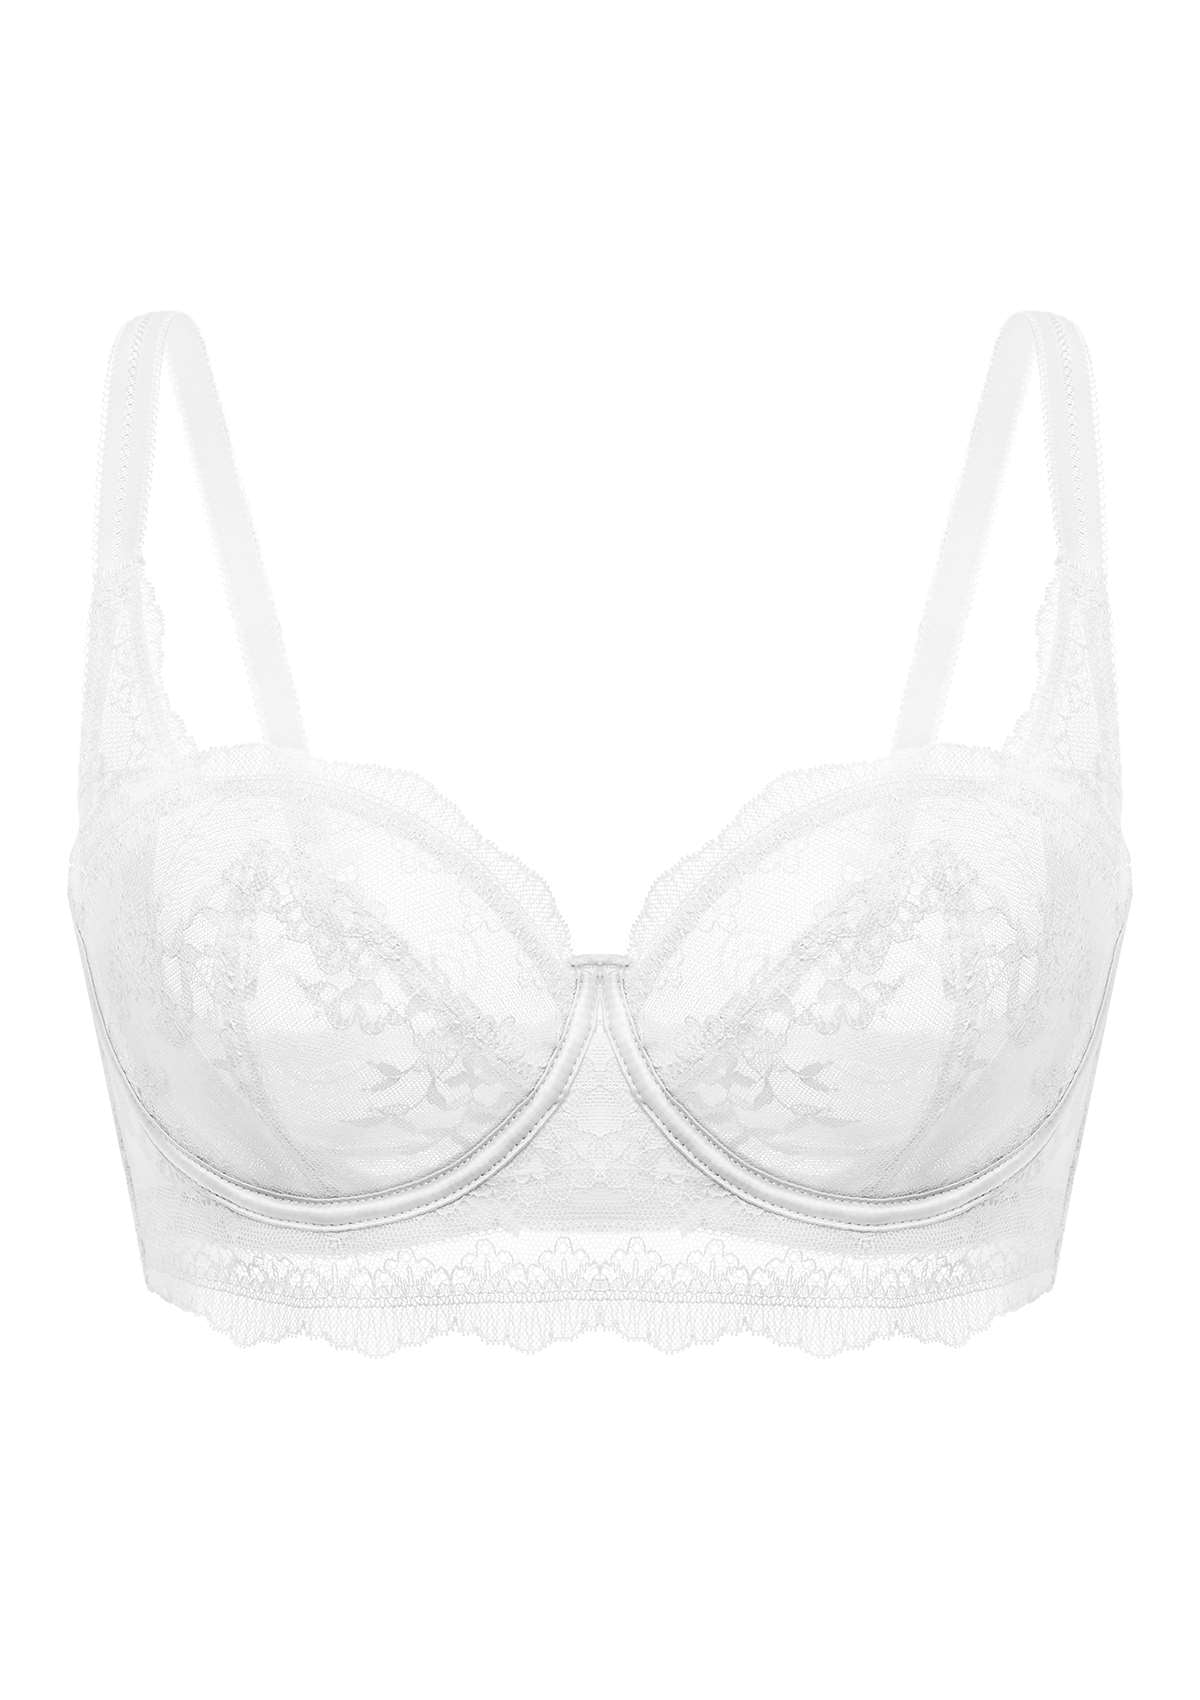 HSIA I Do Floral Lace Bridal Balconette Beautiful Bra For Special Day - Pink / 36 / DDD/F